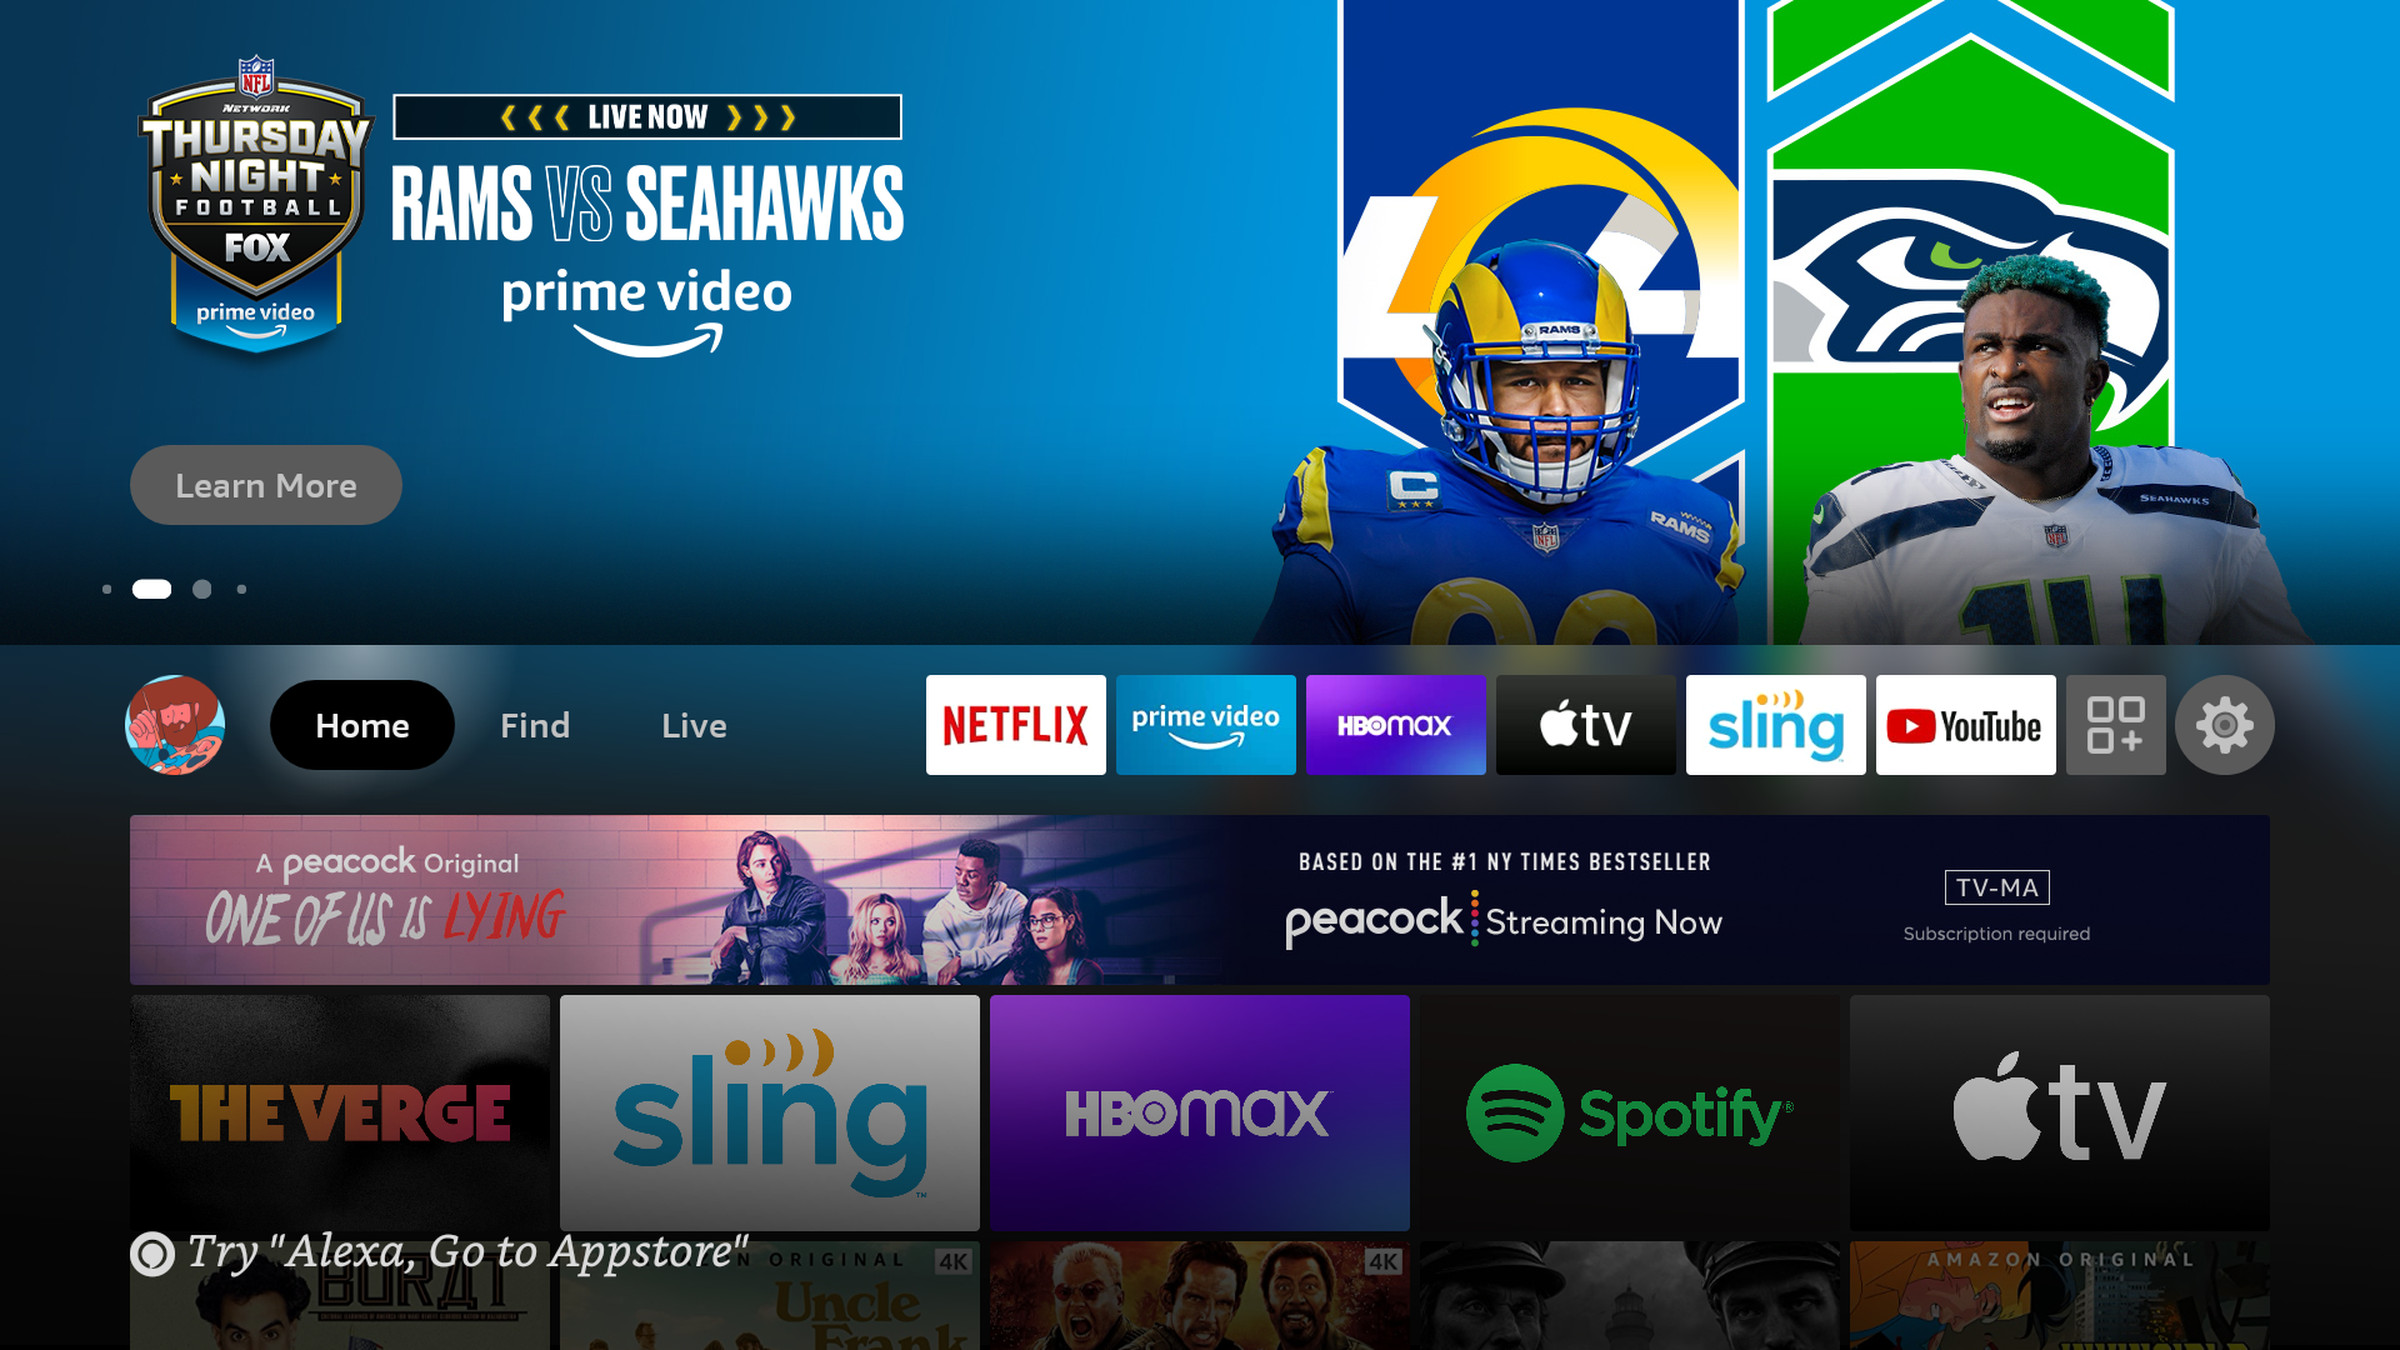 The Fire TV homescreen still puts a heavy emphasis on Amazon content.